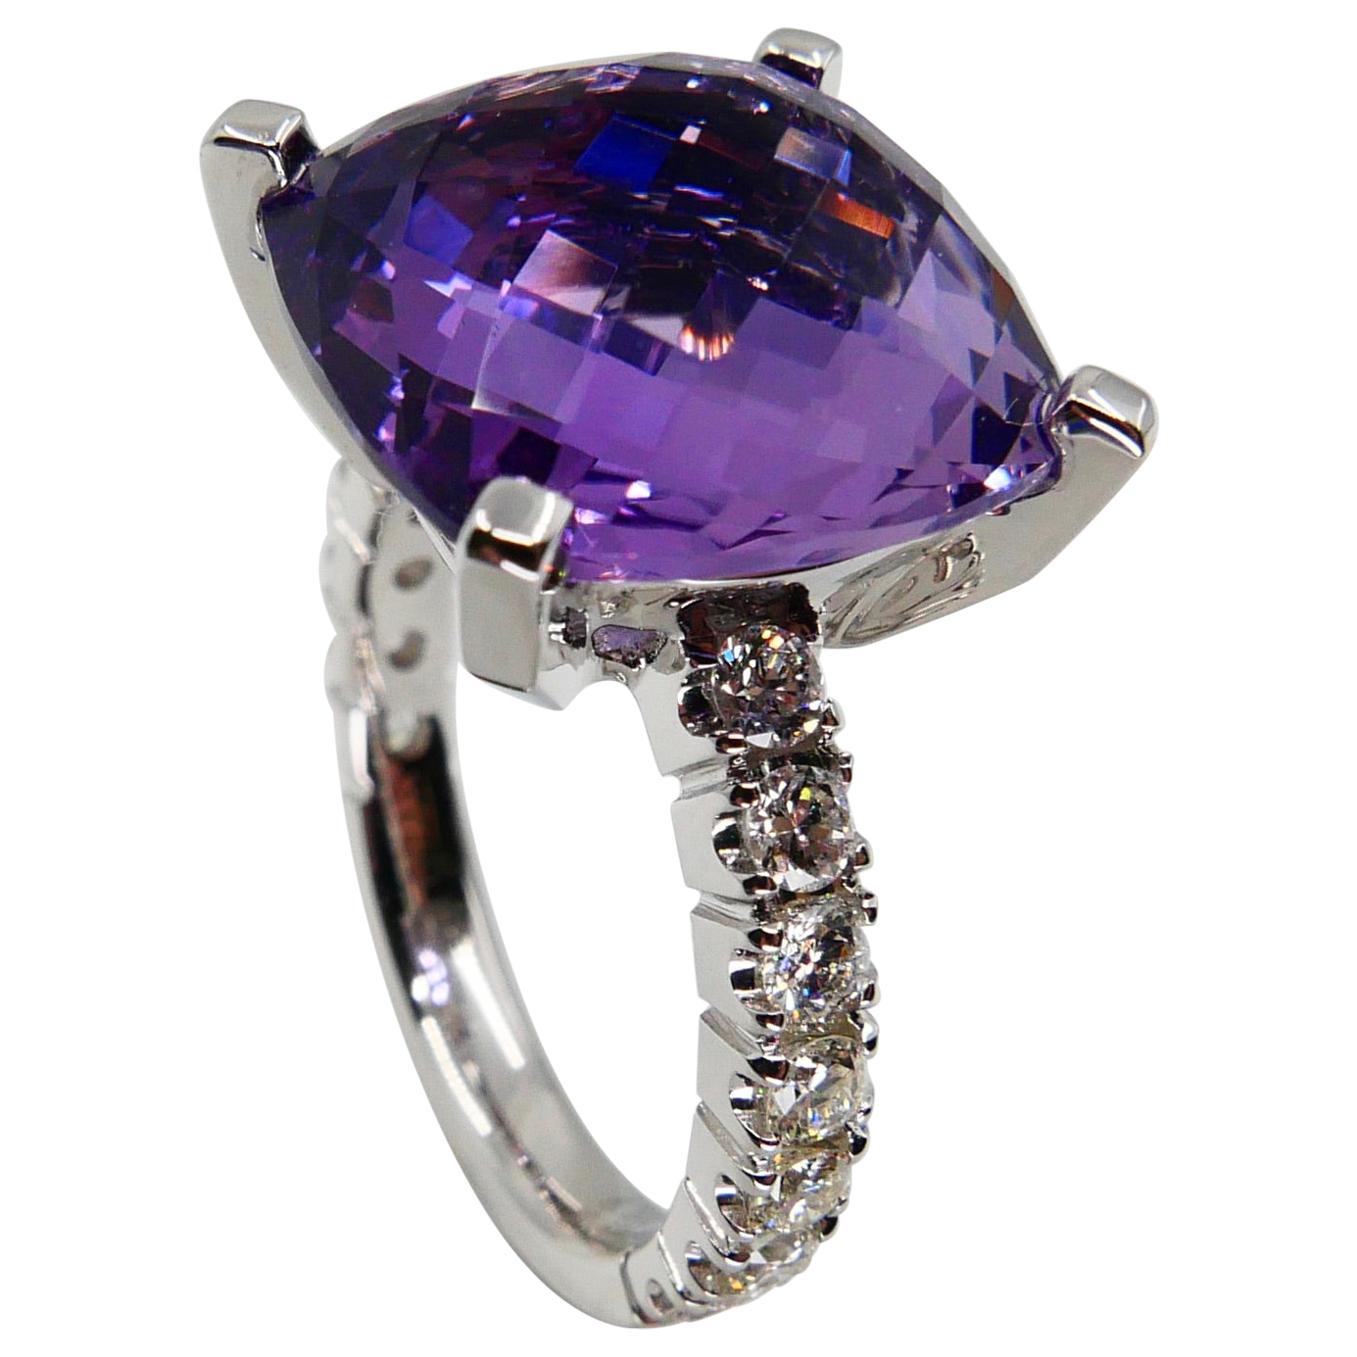 8.67 Carat Faceted Amethyst and Diamond Cocktail Ring, 18 Karat White Gold For Sale